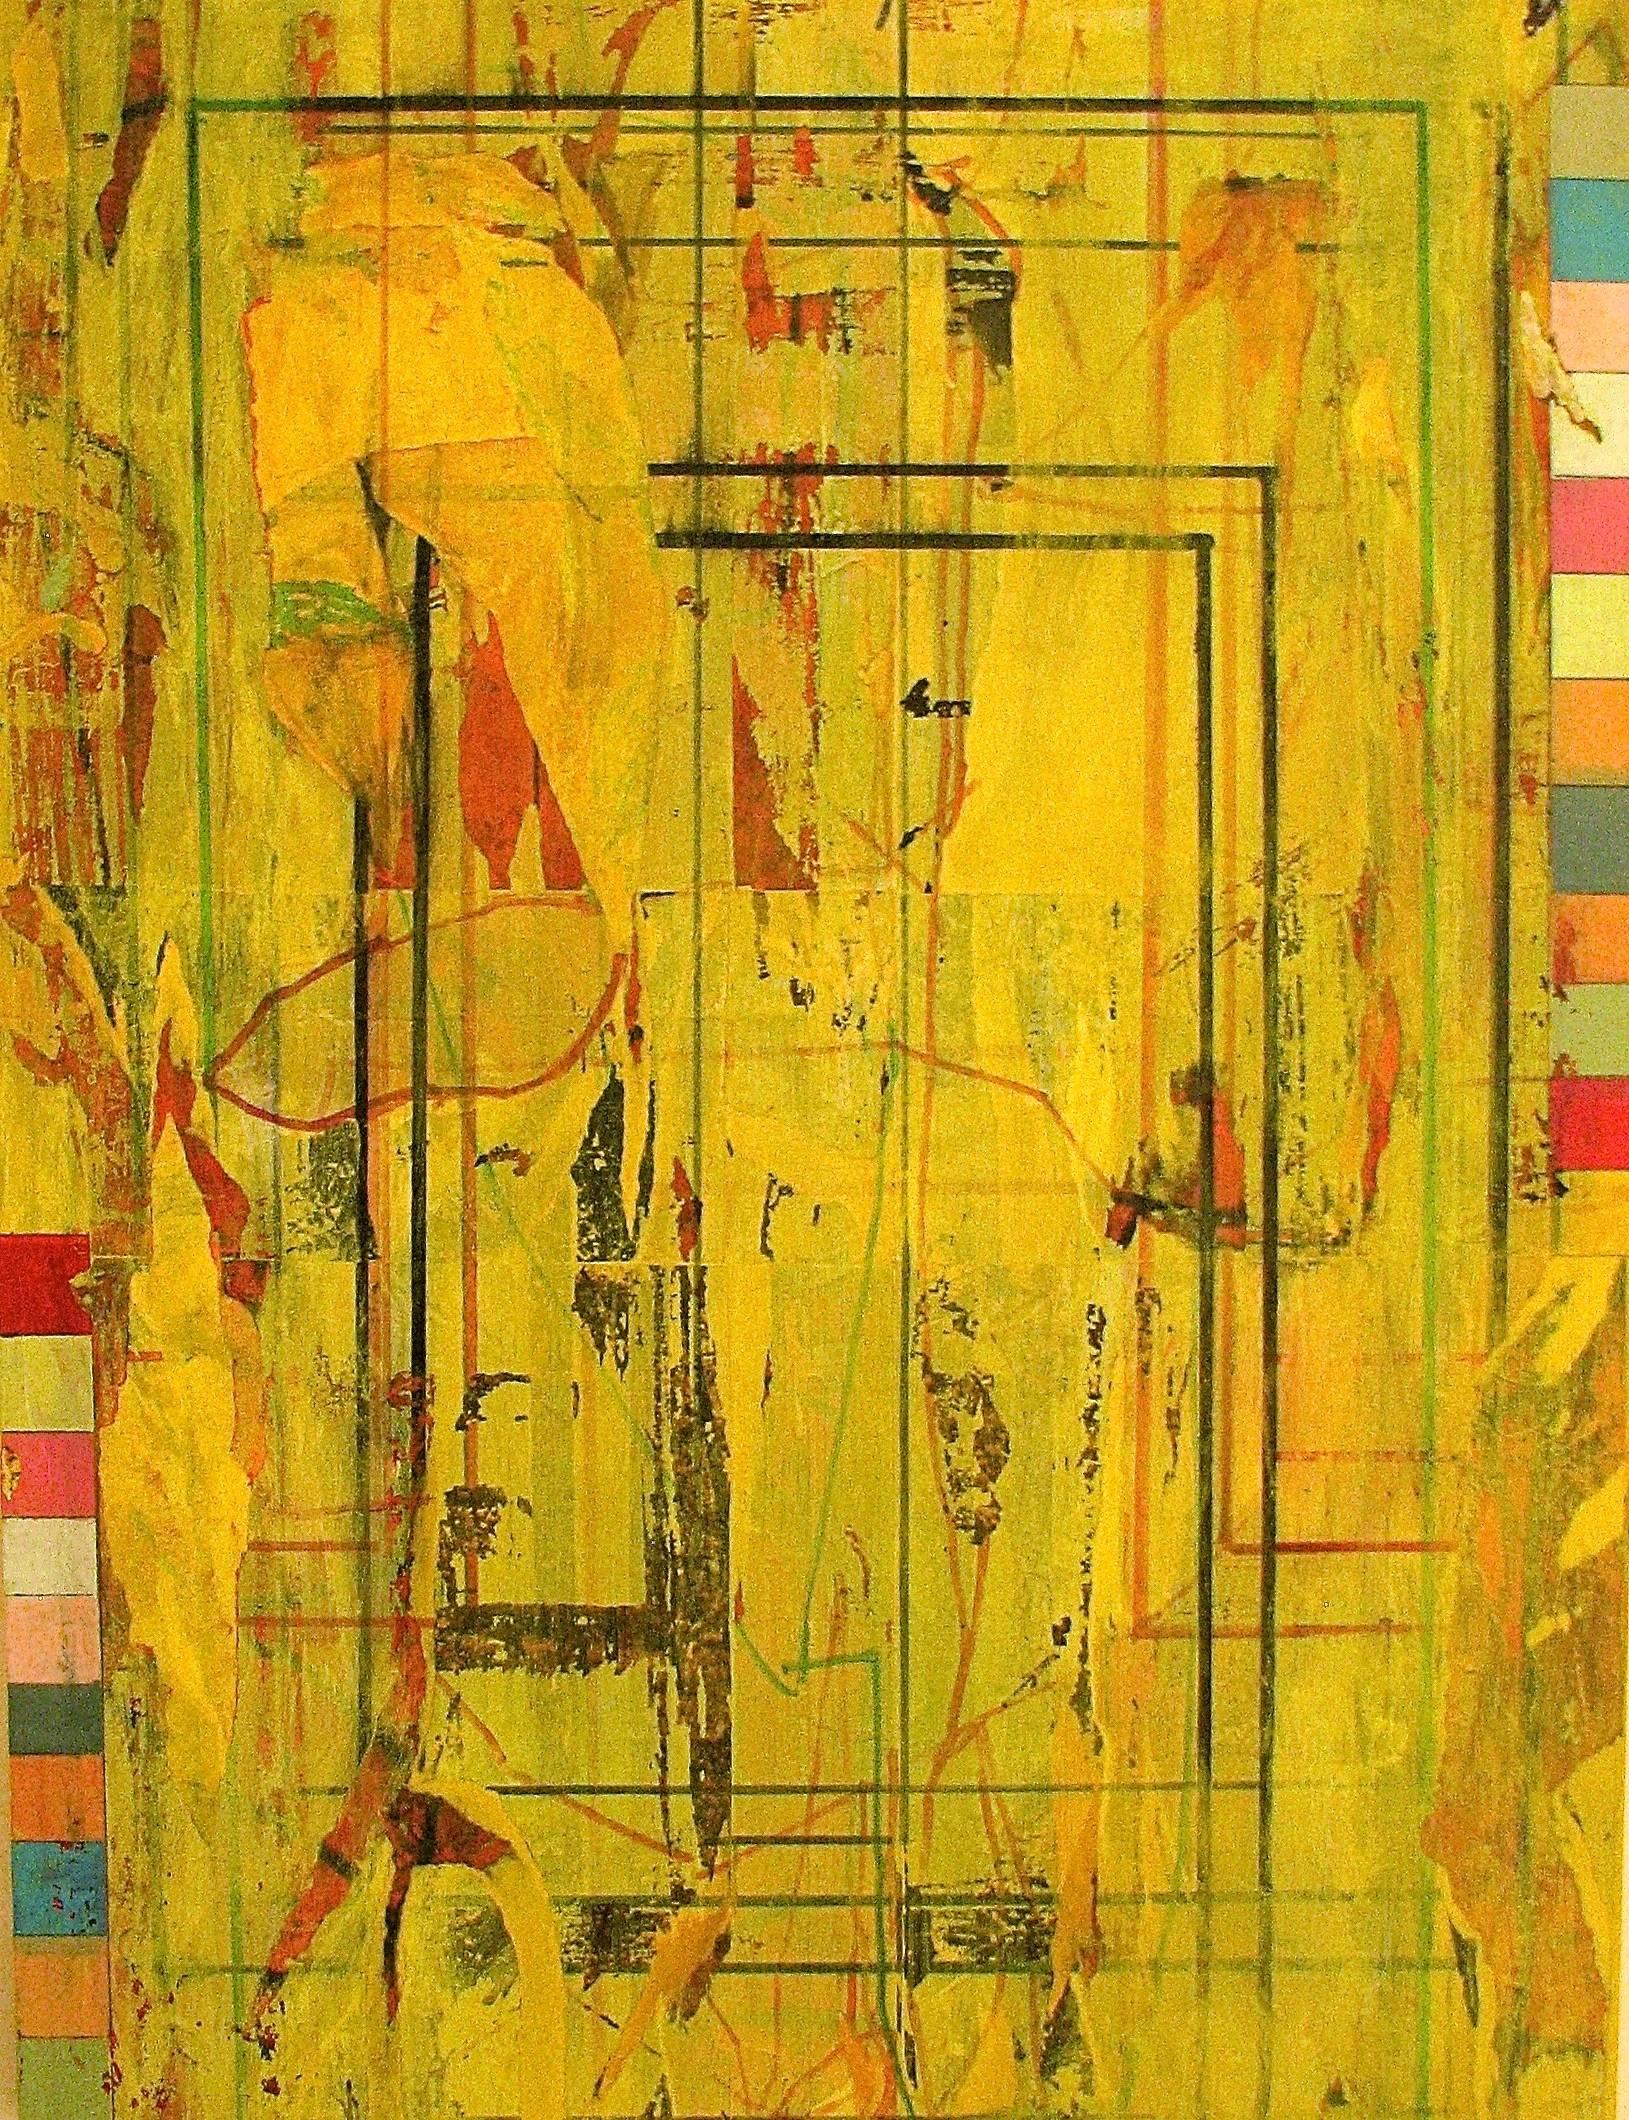 Nancy Berlin Abstract Painting - "Watching Change" Abstract Expressionist Yellow Bright Colorful Mixed Media